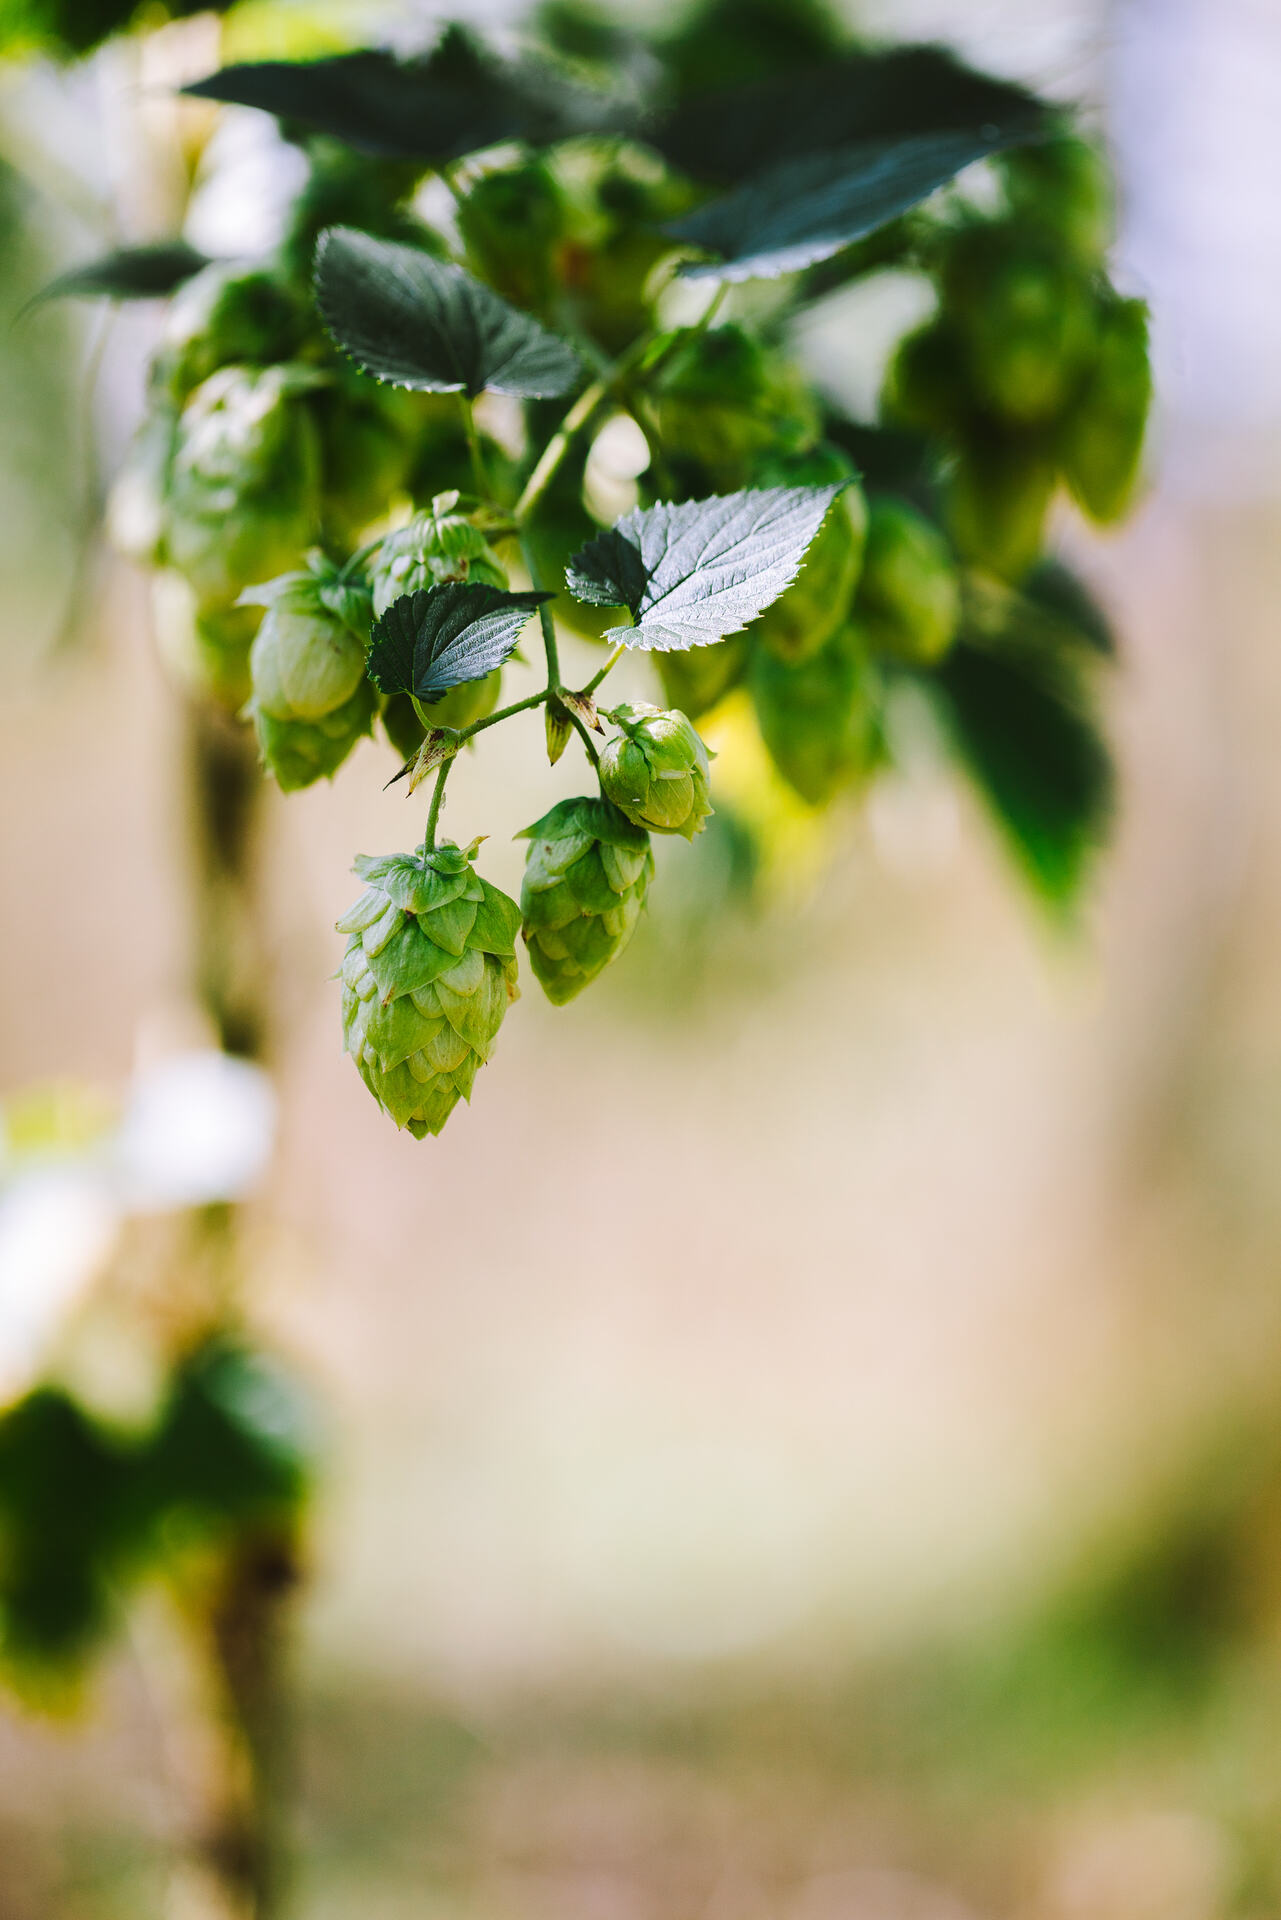 Beer Fundamentals – What are hops?